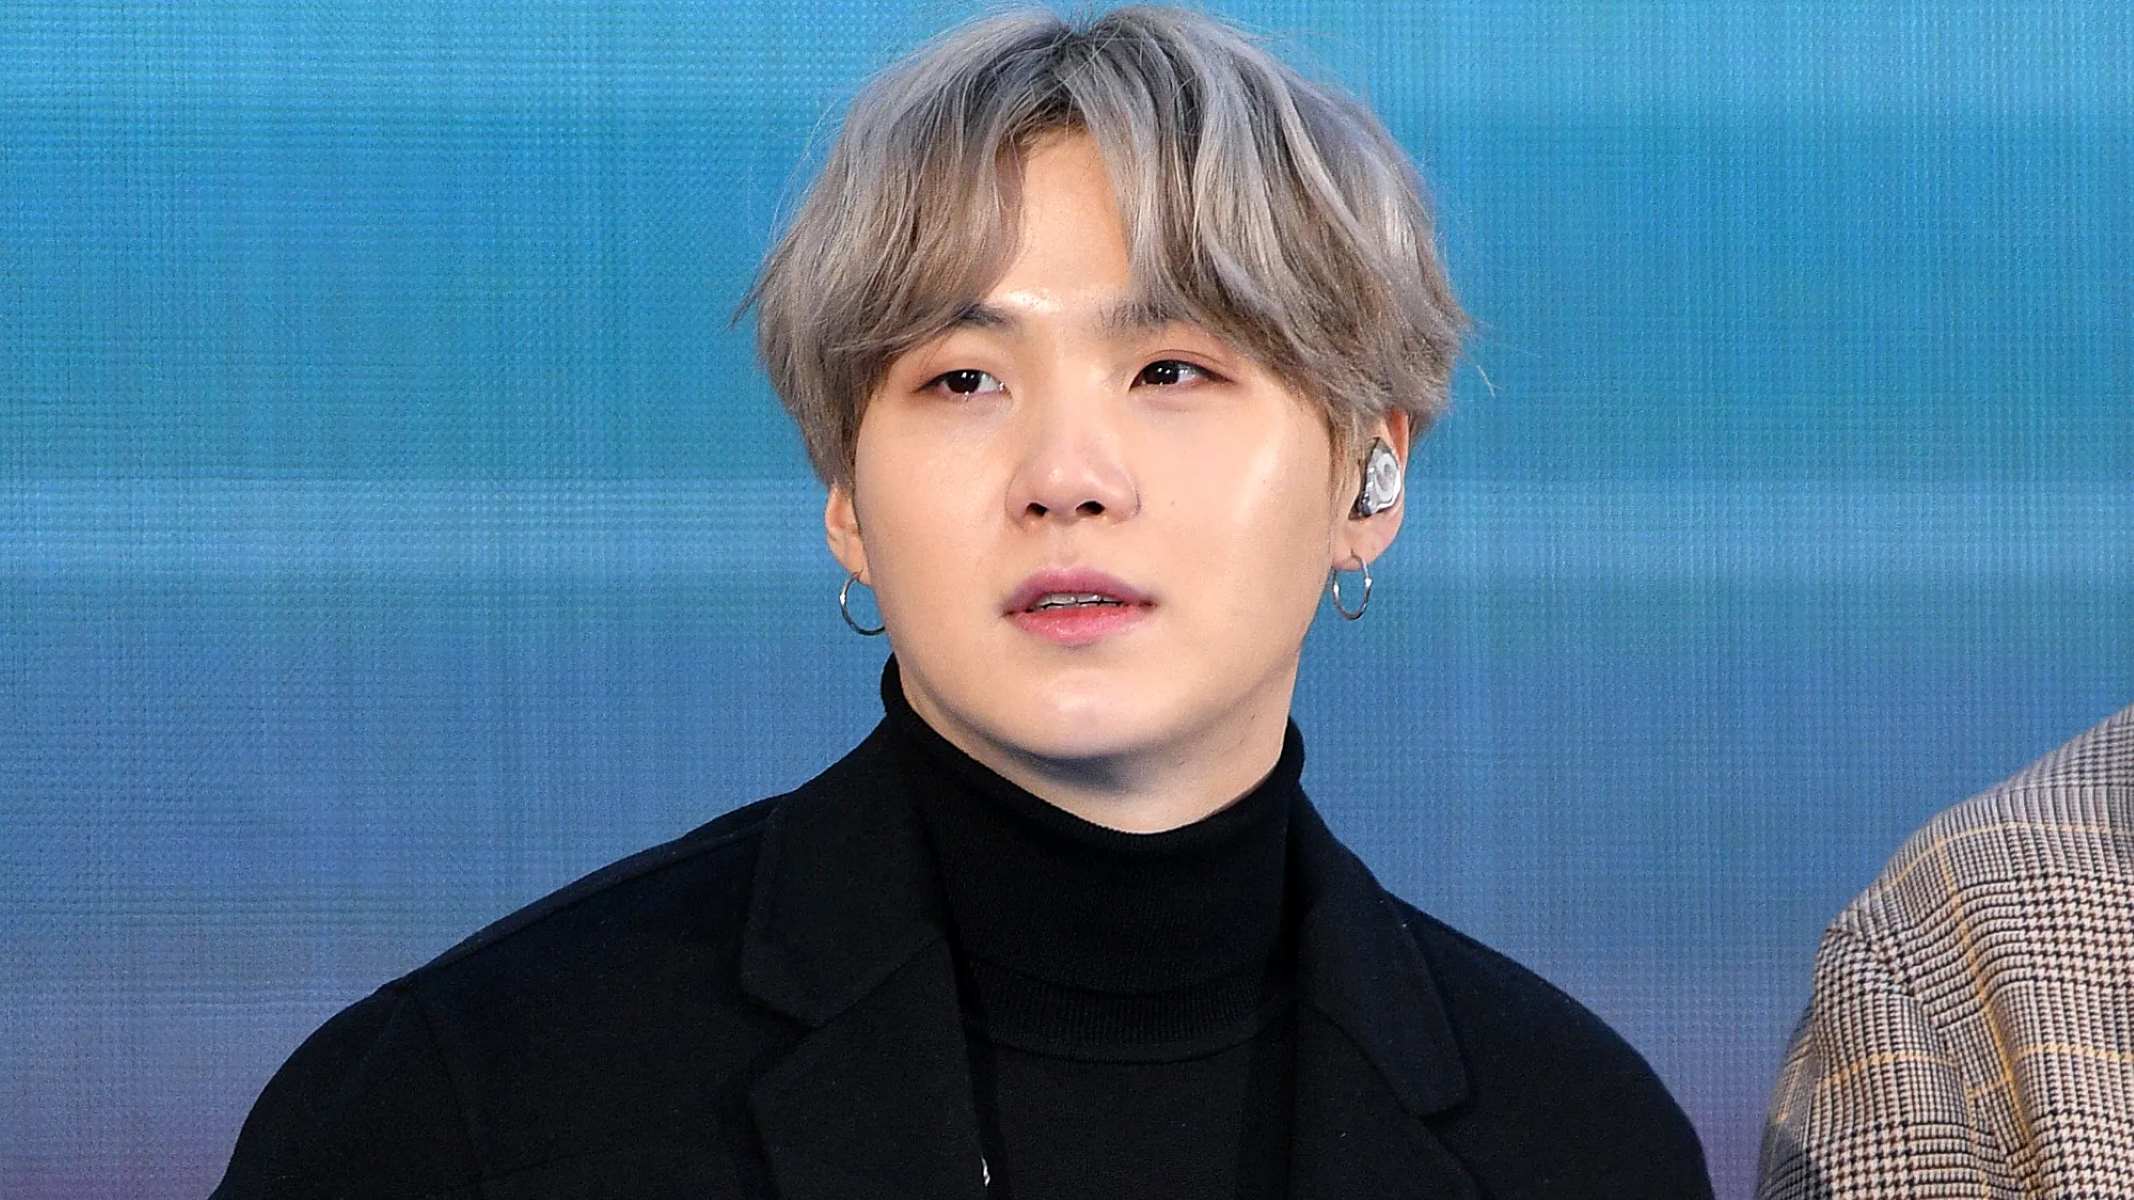 BTS’s Suga’s Secret Girlfriend Revealed! Their Unexpected Love Story Unveiled